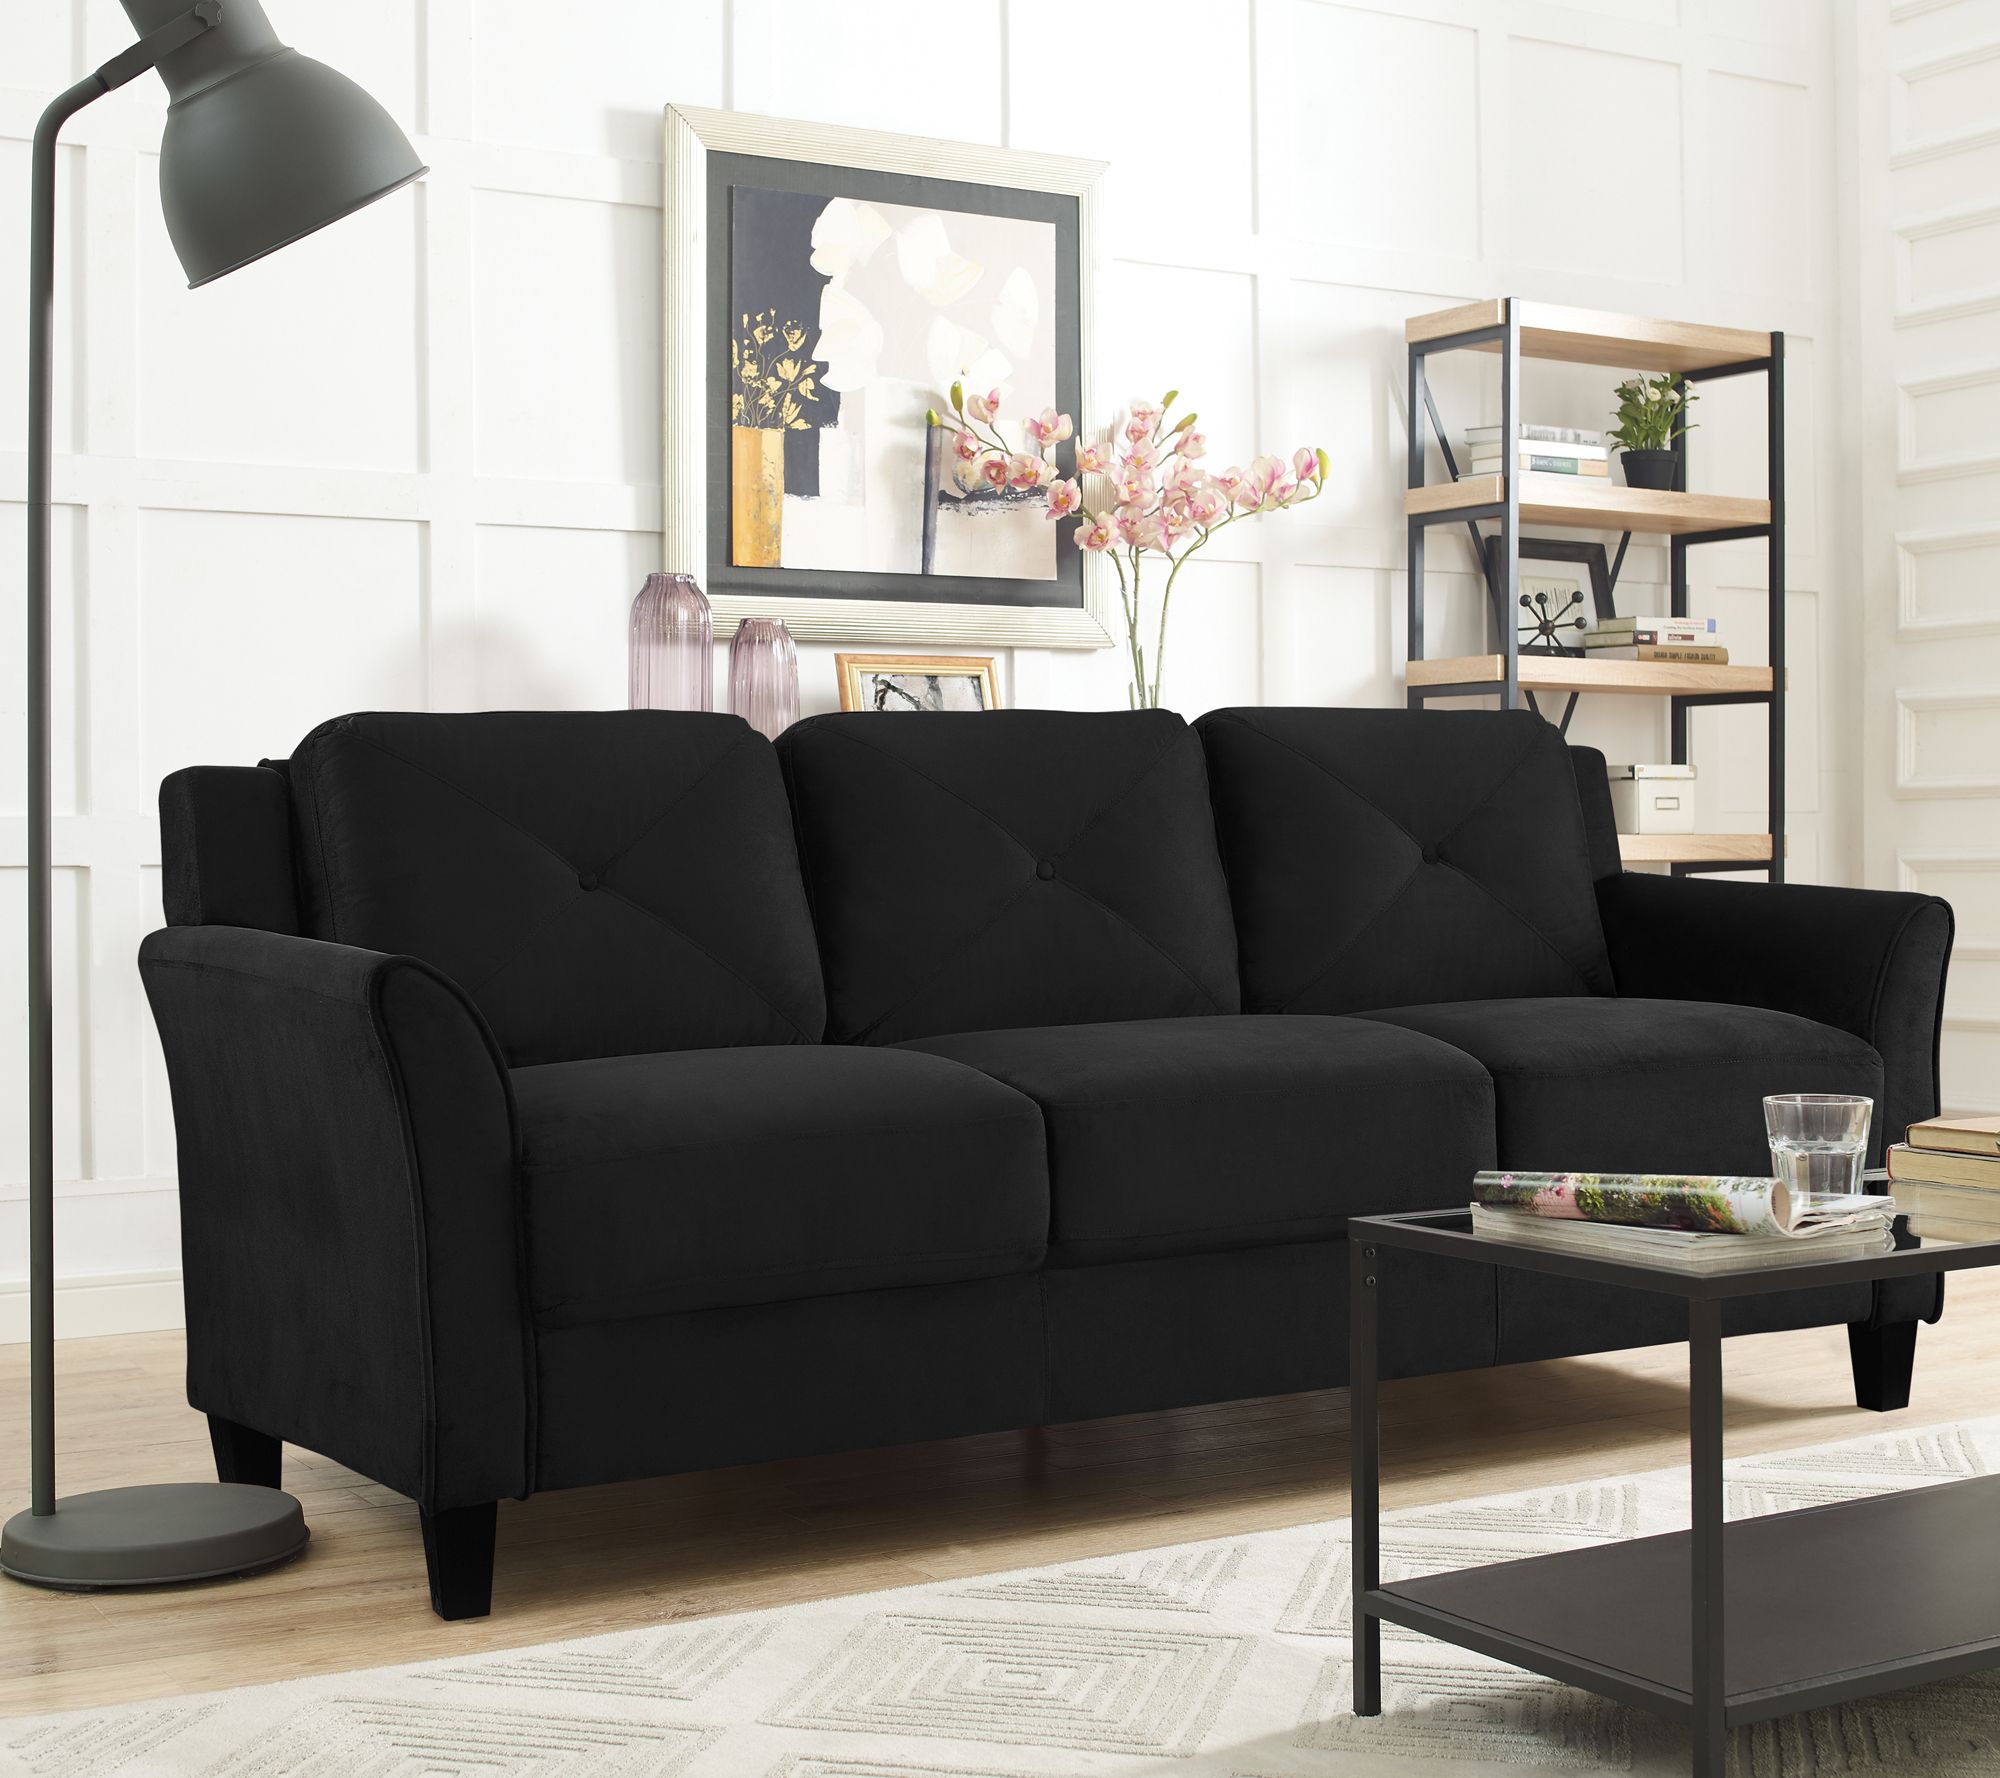 Lukaa Sofa Upholstered Microfiber Curved Arms - QVC.com